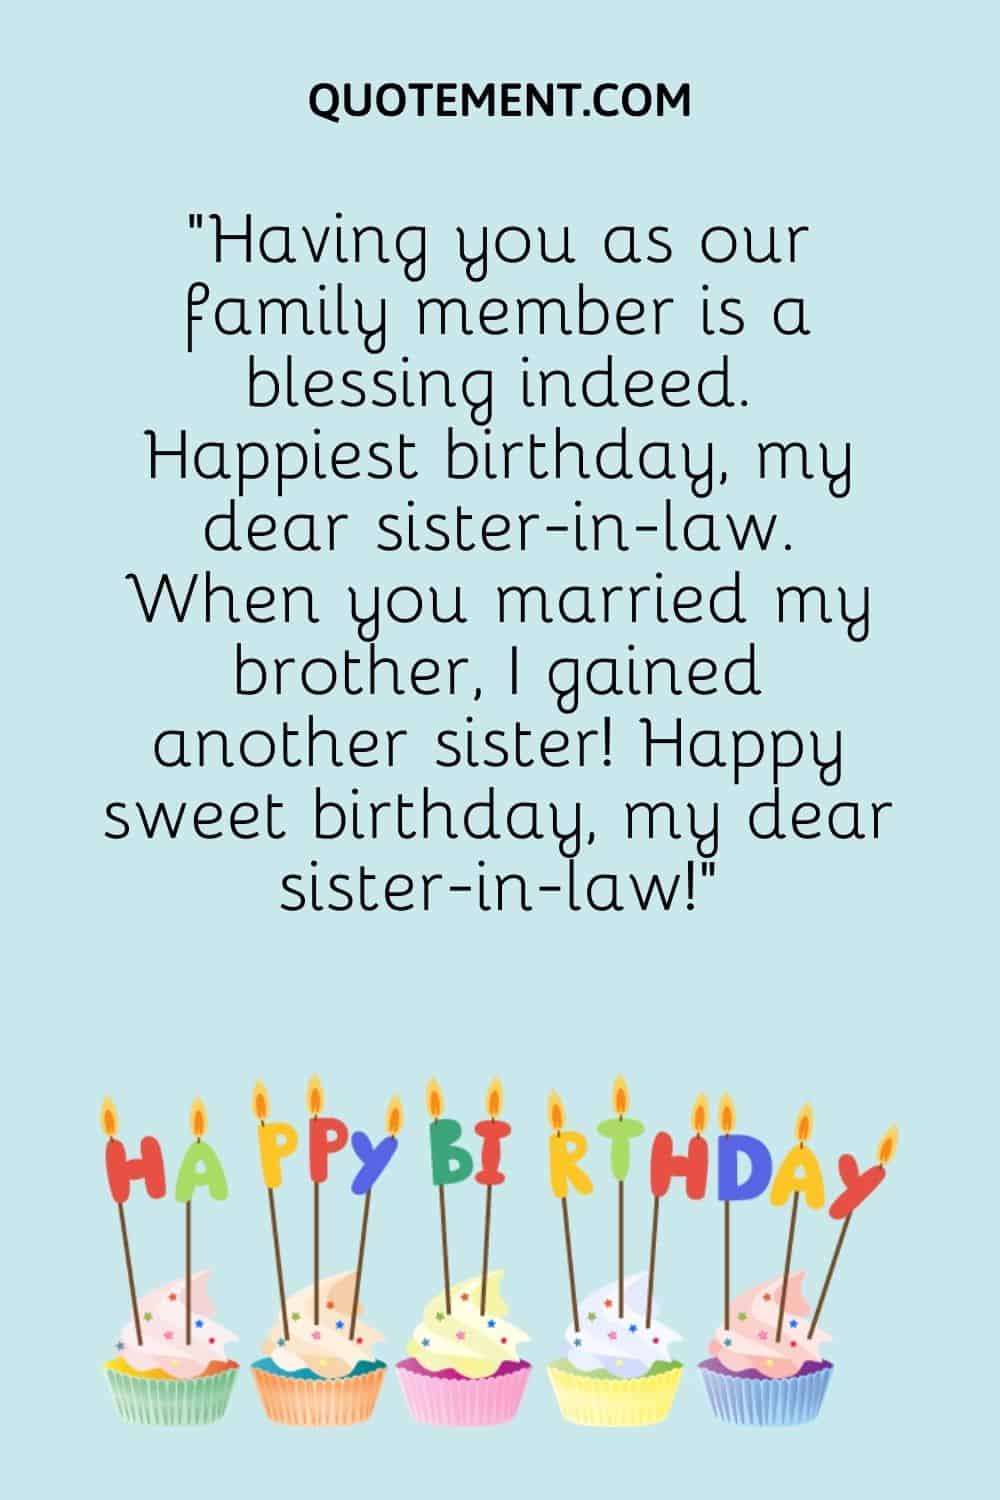 90 Most Heart Touching Birthday Wishes For Sister In Law